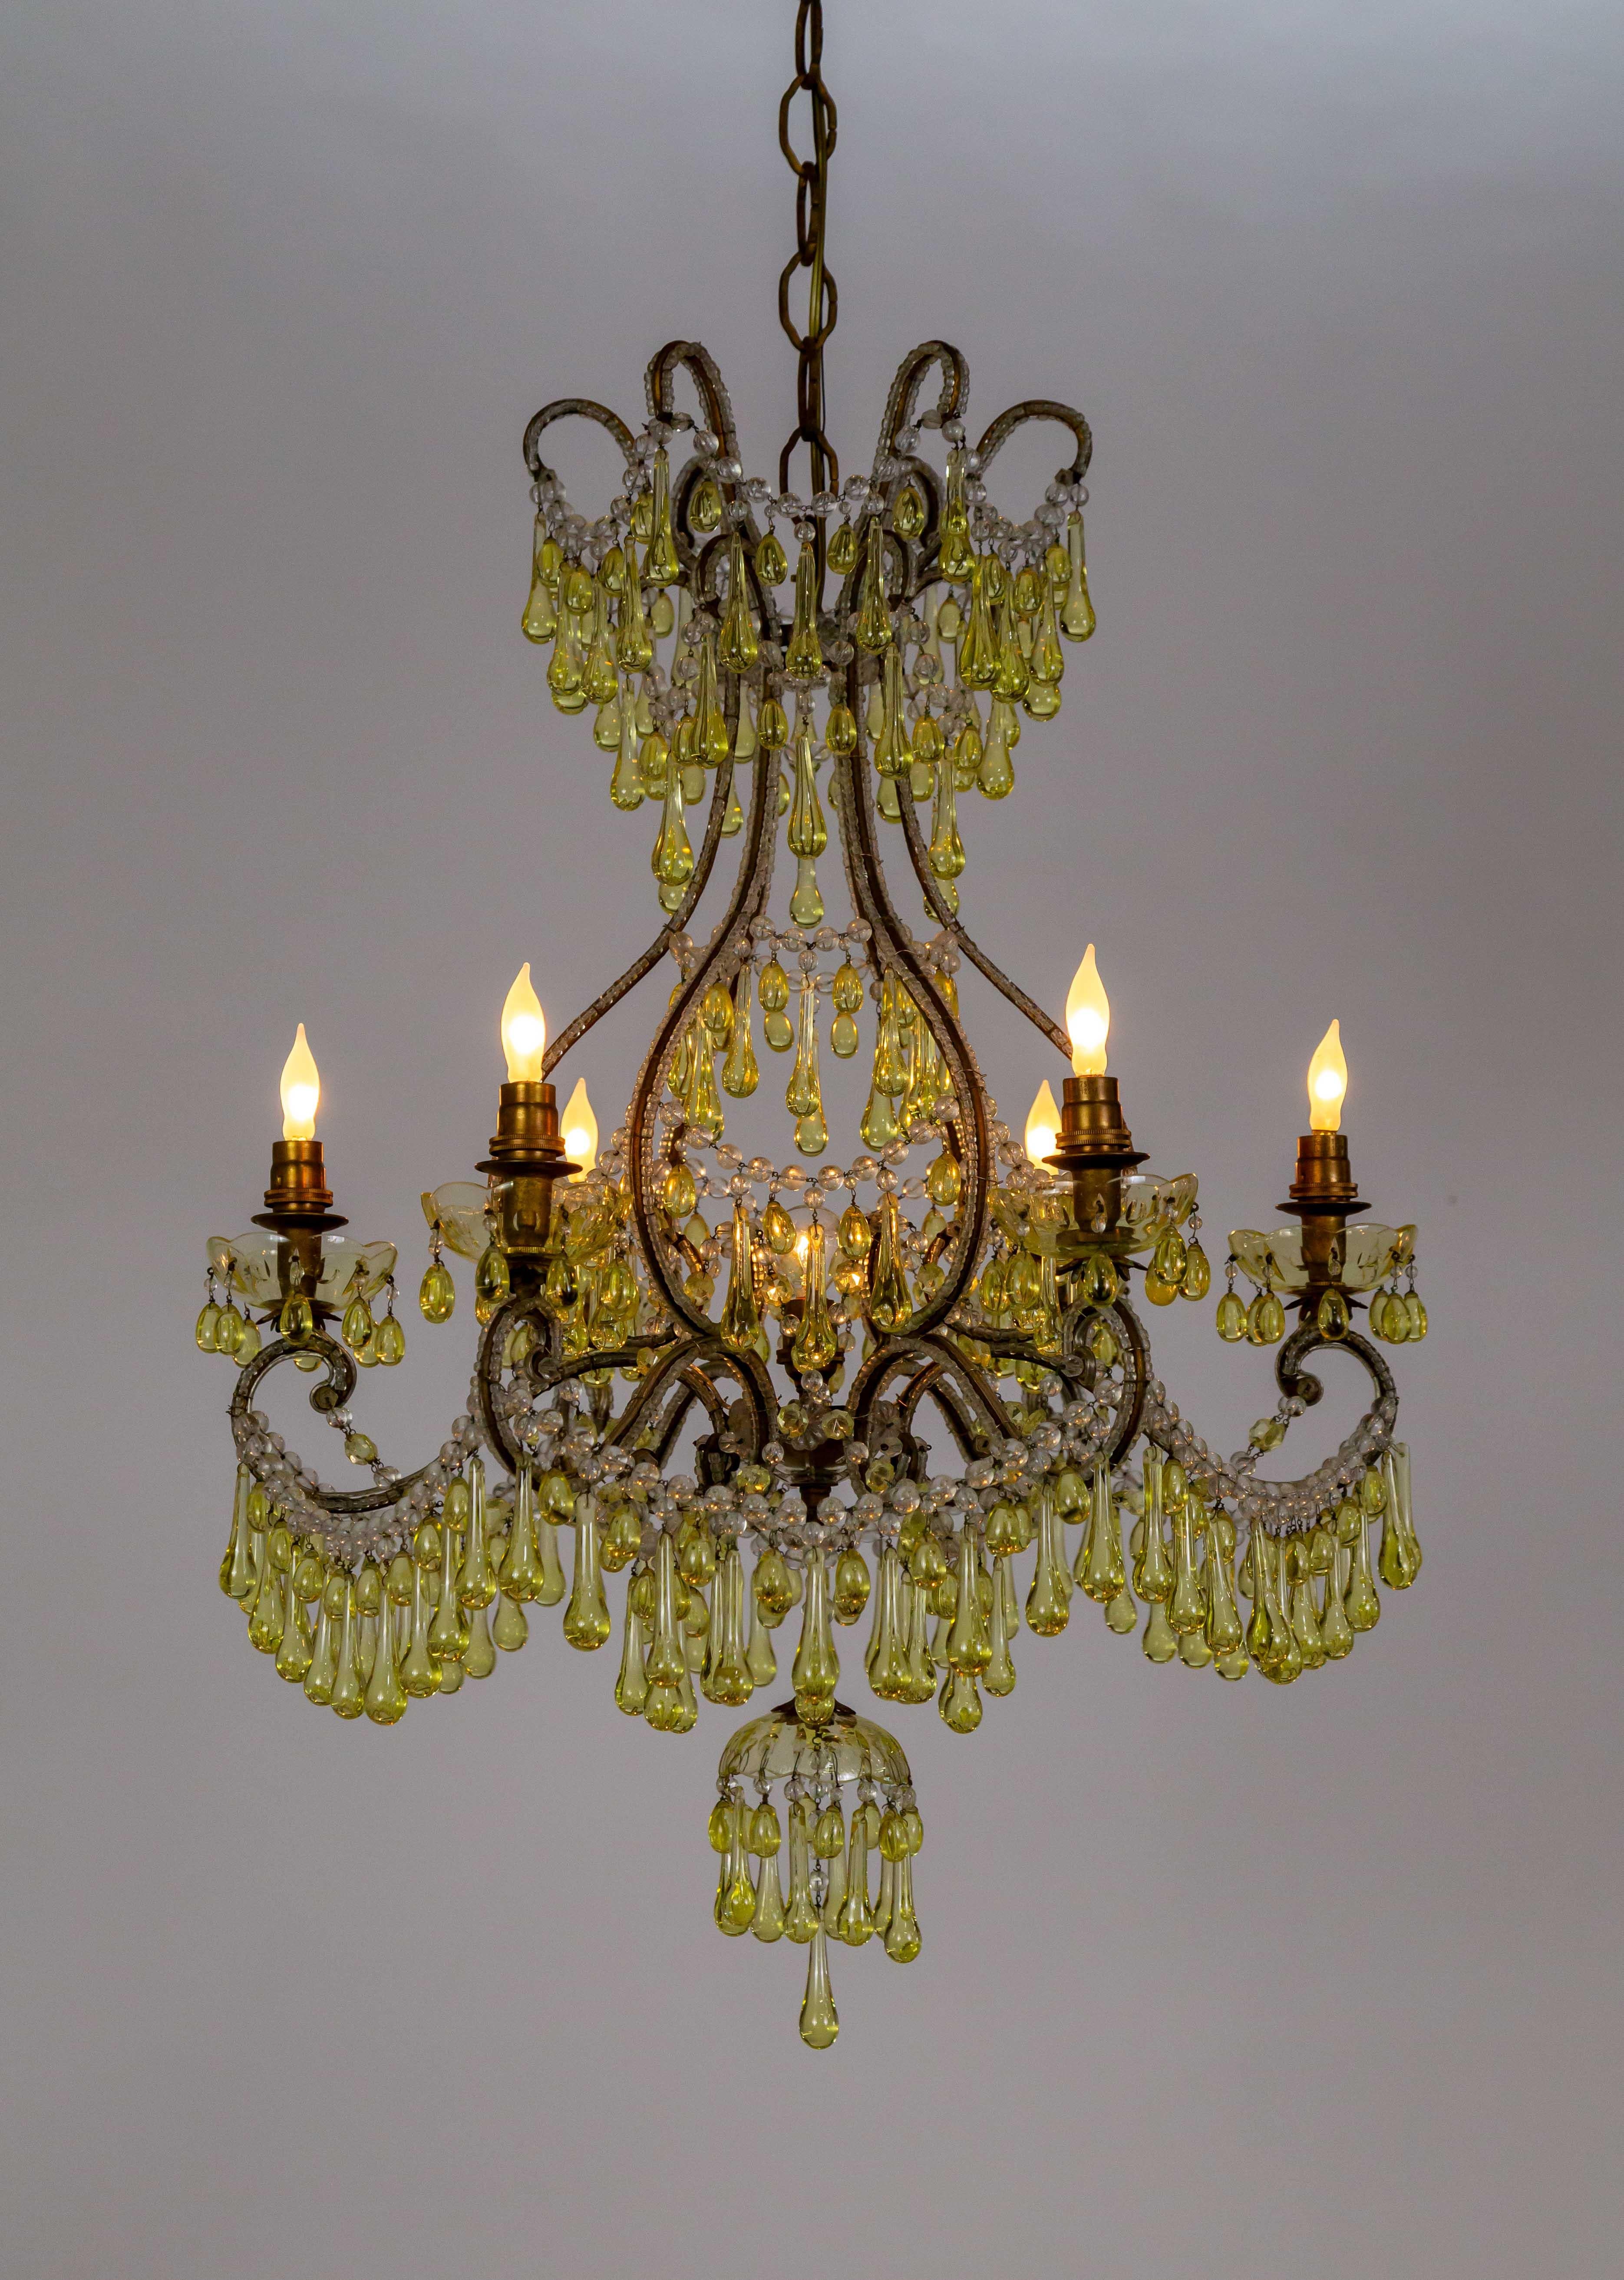 19th Century Rare Pale Yellow Crystal Drops Birdcage Chandelier For Sale 6